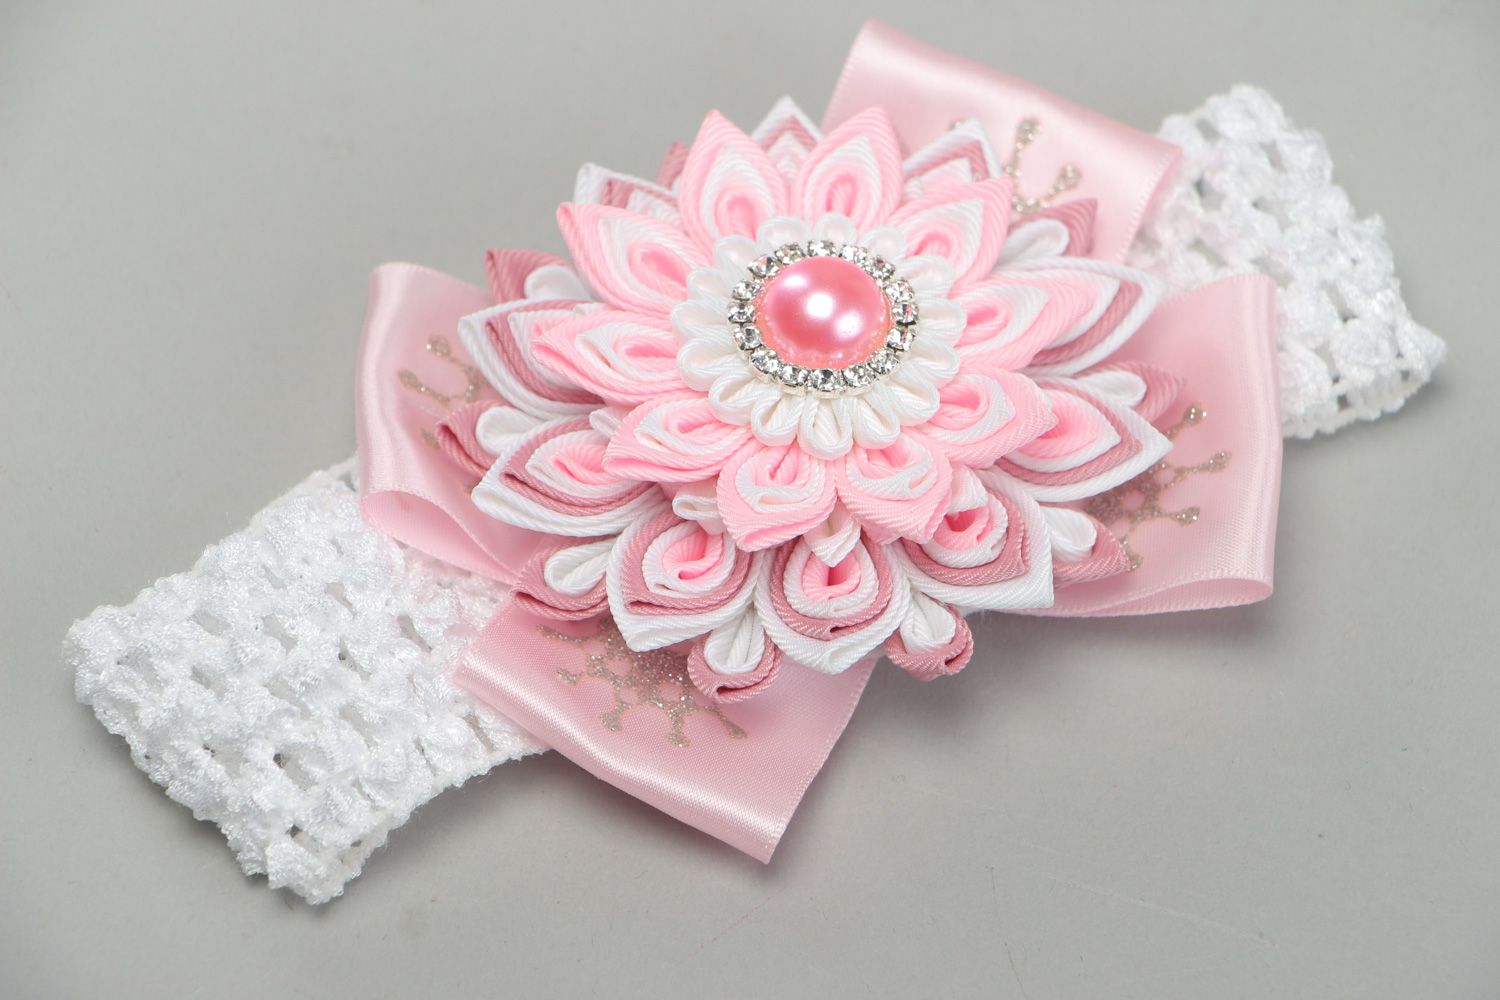 Tender handmade headband with pink flower created of satin ribbons for babies photo 1